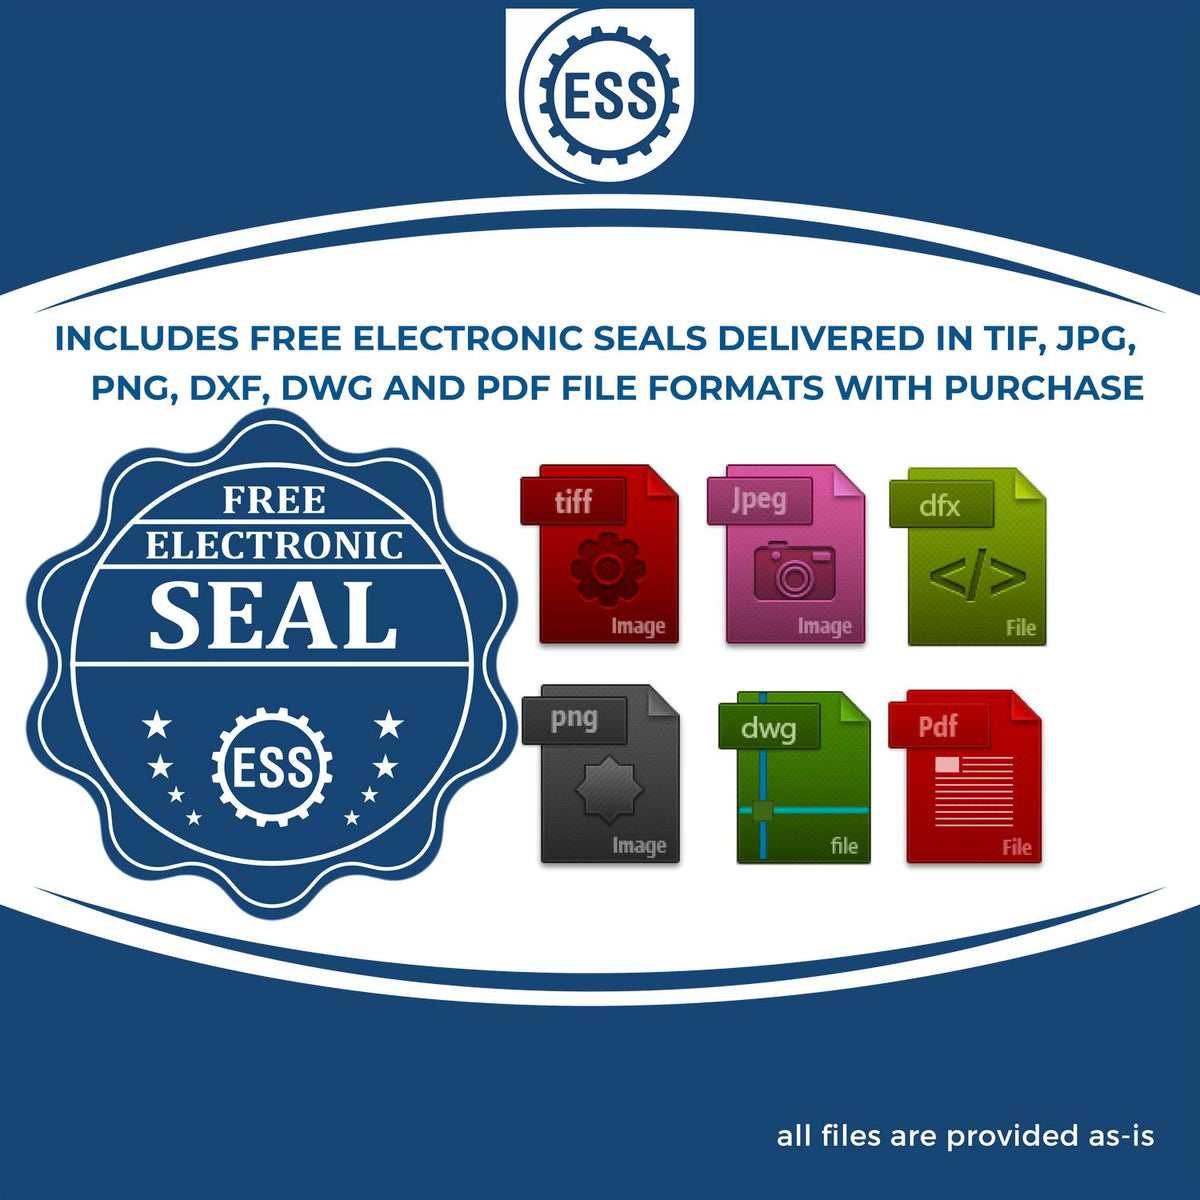 An infographic for the free electronic seal for the Gift Louisiana Land Surveyor Seal illustrating the different file type icons such as DXF, DWG, TIF, JPG and PNG.